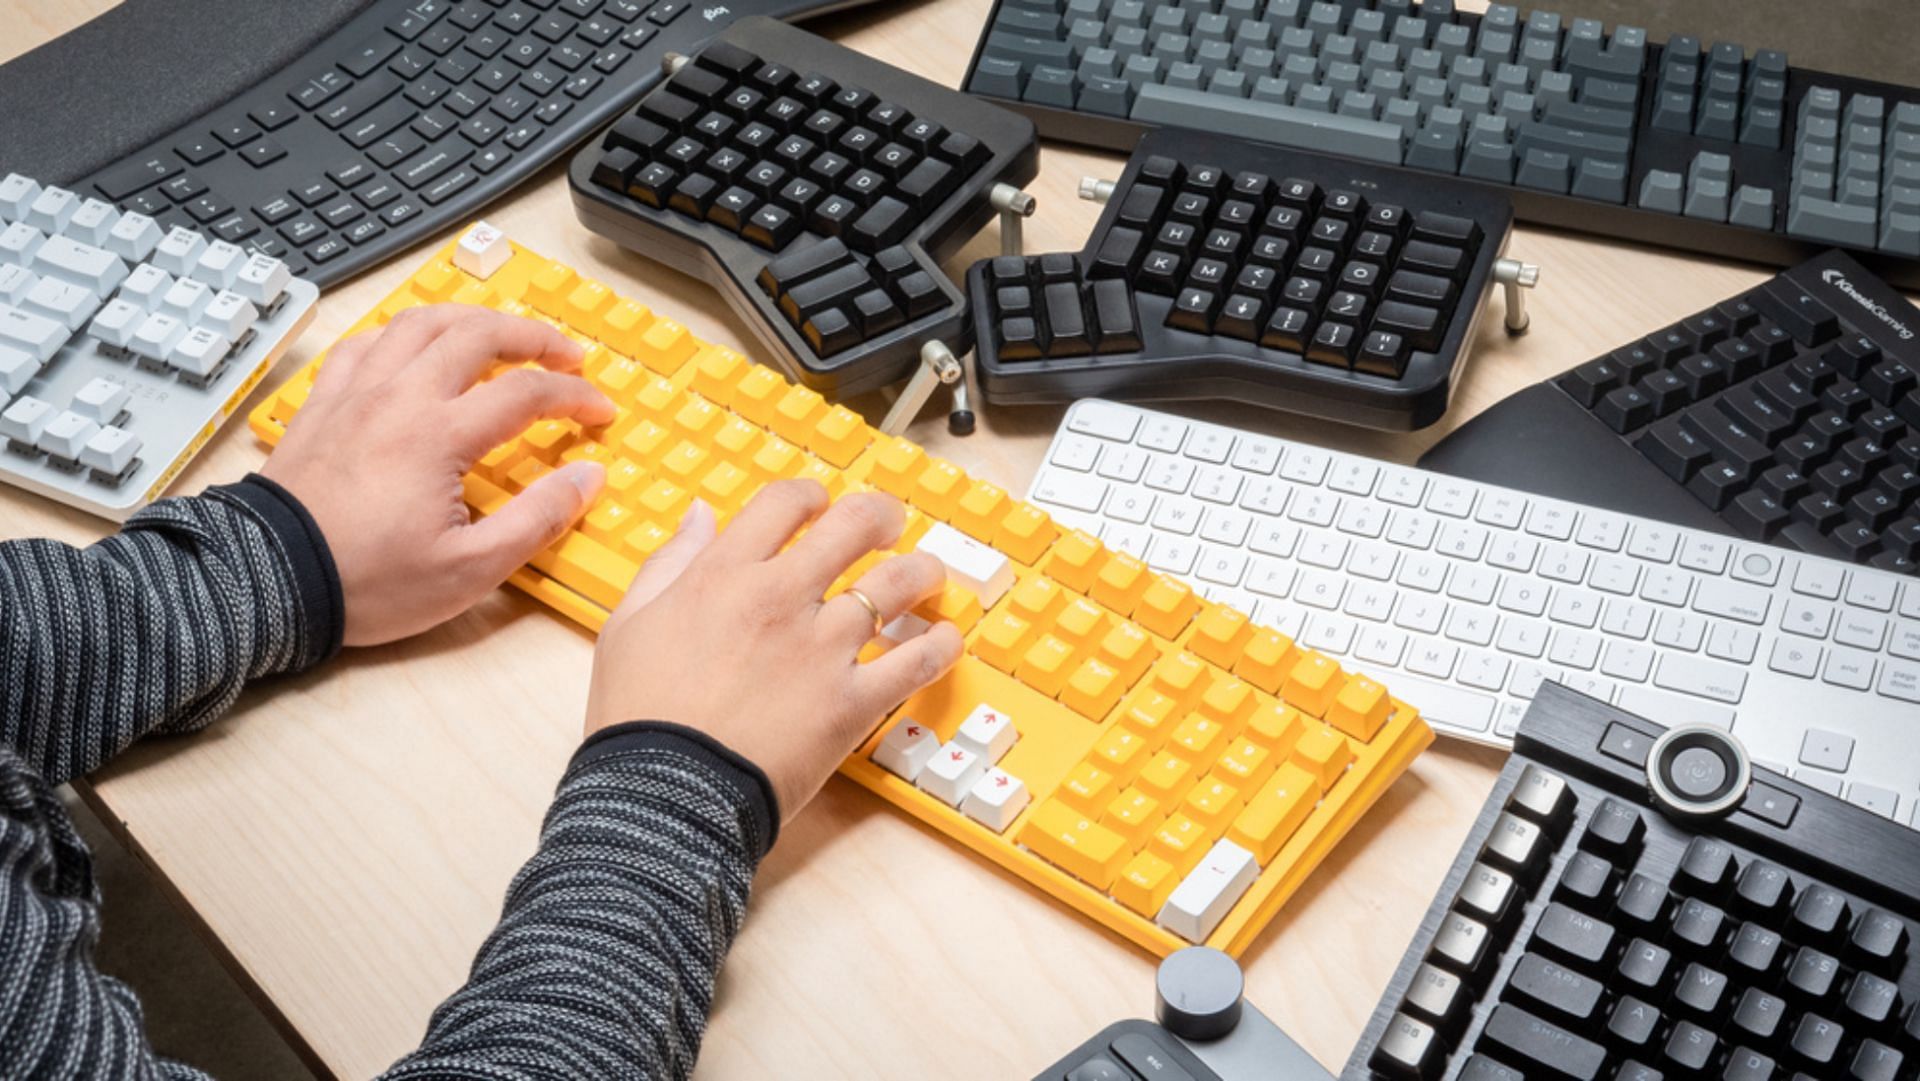 Keyboard shortcuts are highly useful to increase productivity (Image via RTINGS)